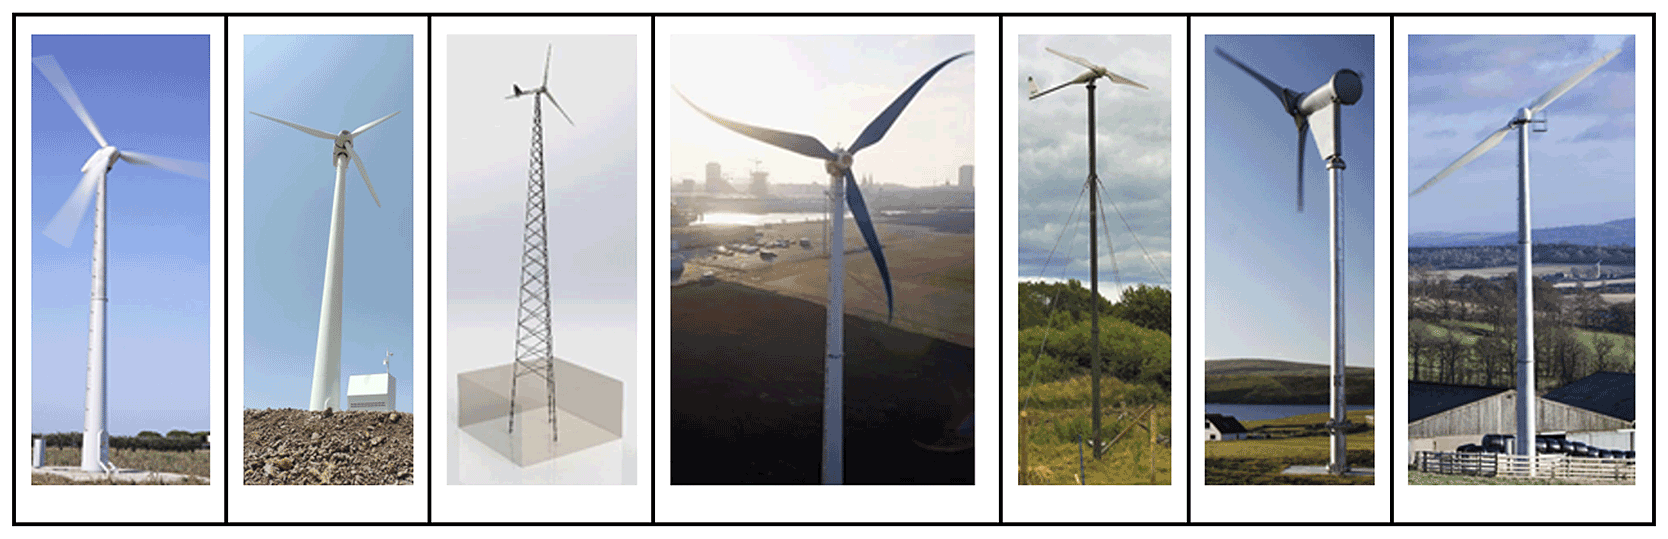 WES - Current status and grand challenges for small wind turbine technology